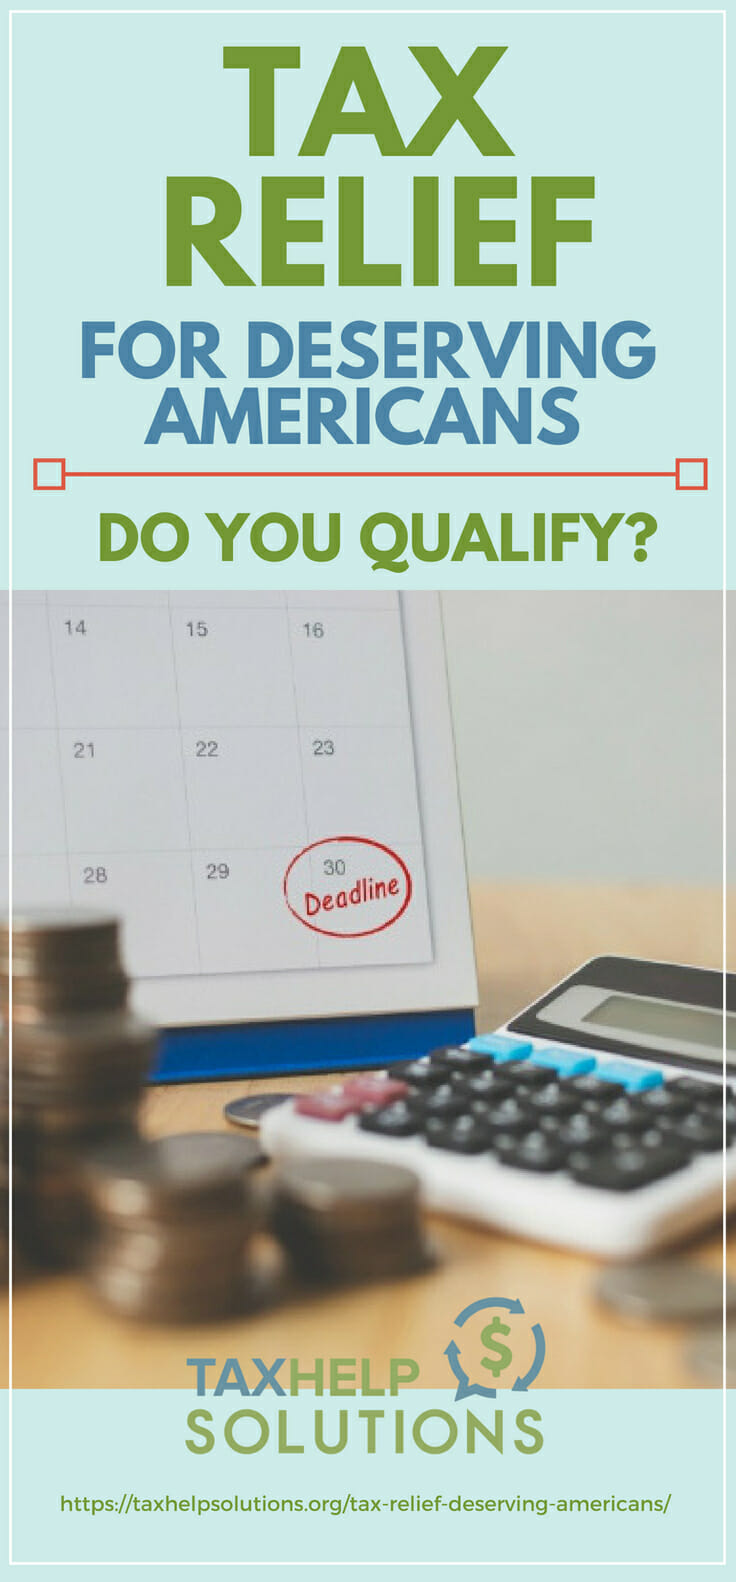 Tax Relief For Deserving Americans | Do You Qualify?